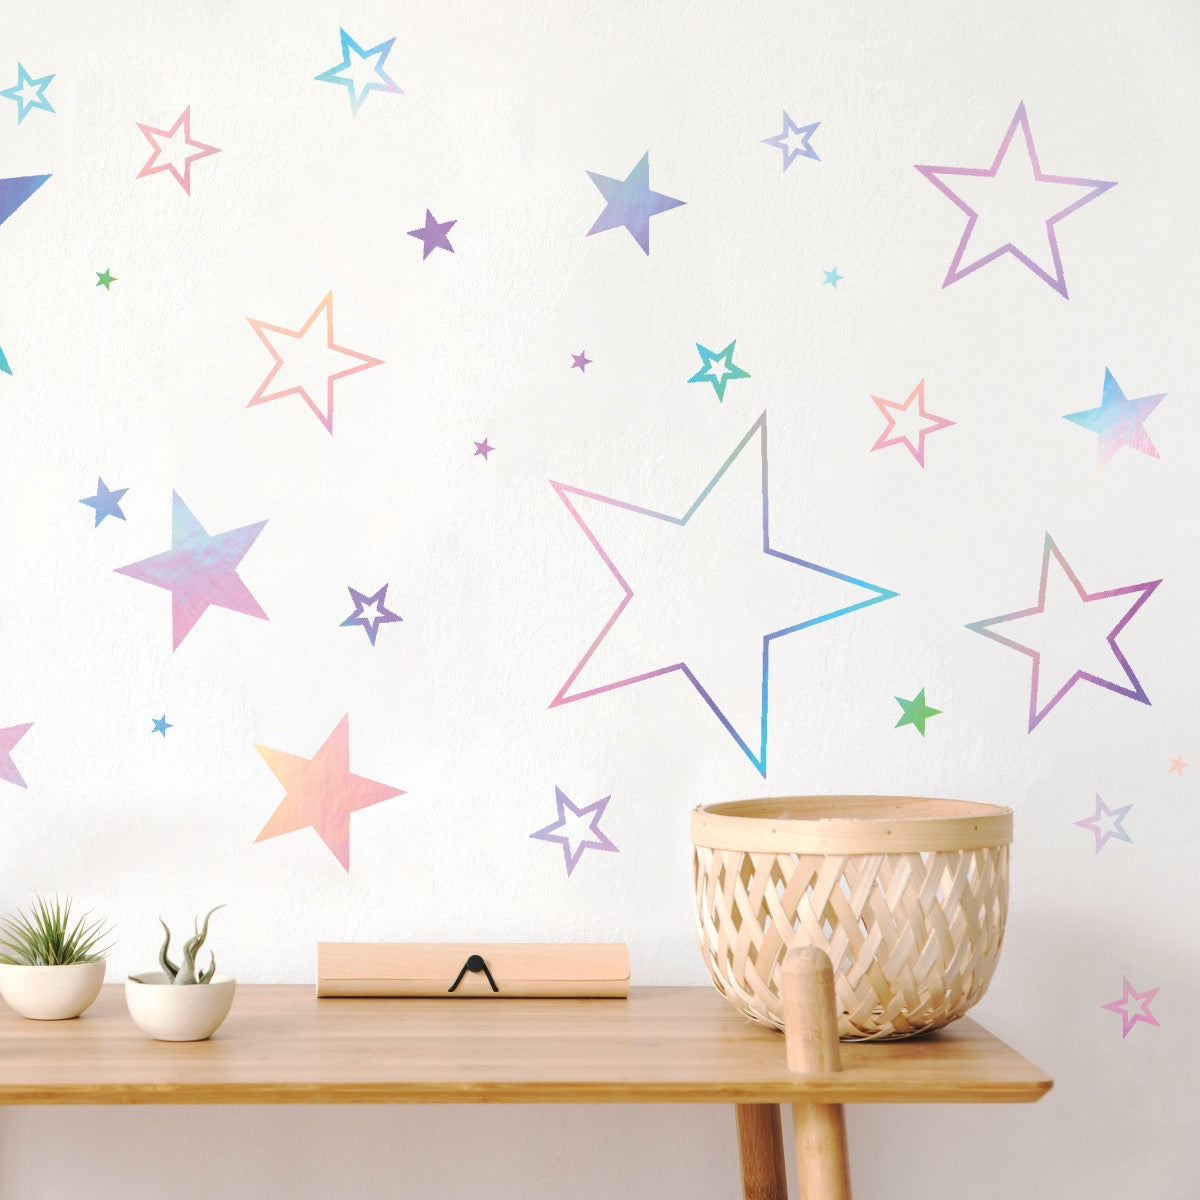 A wall decorated using the Star wall decals from Tempaper.